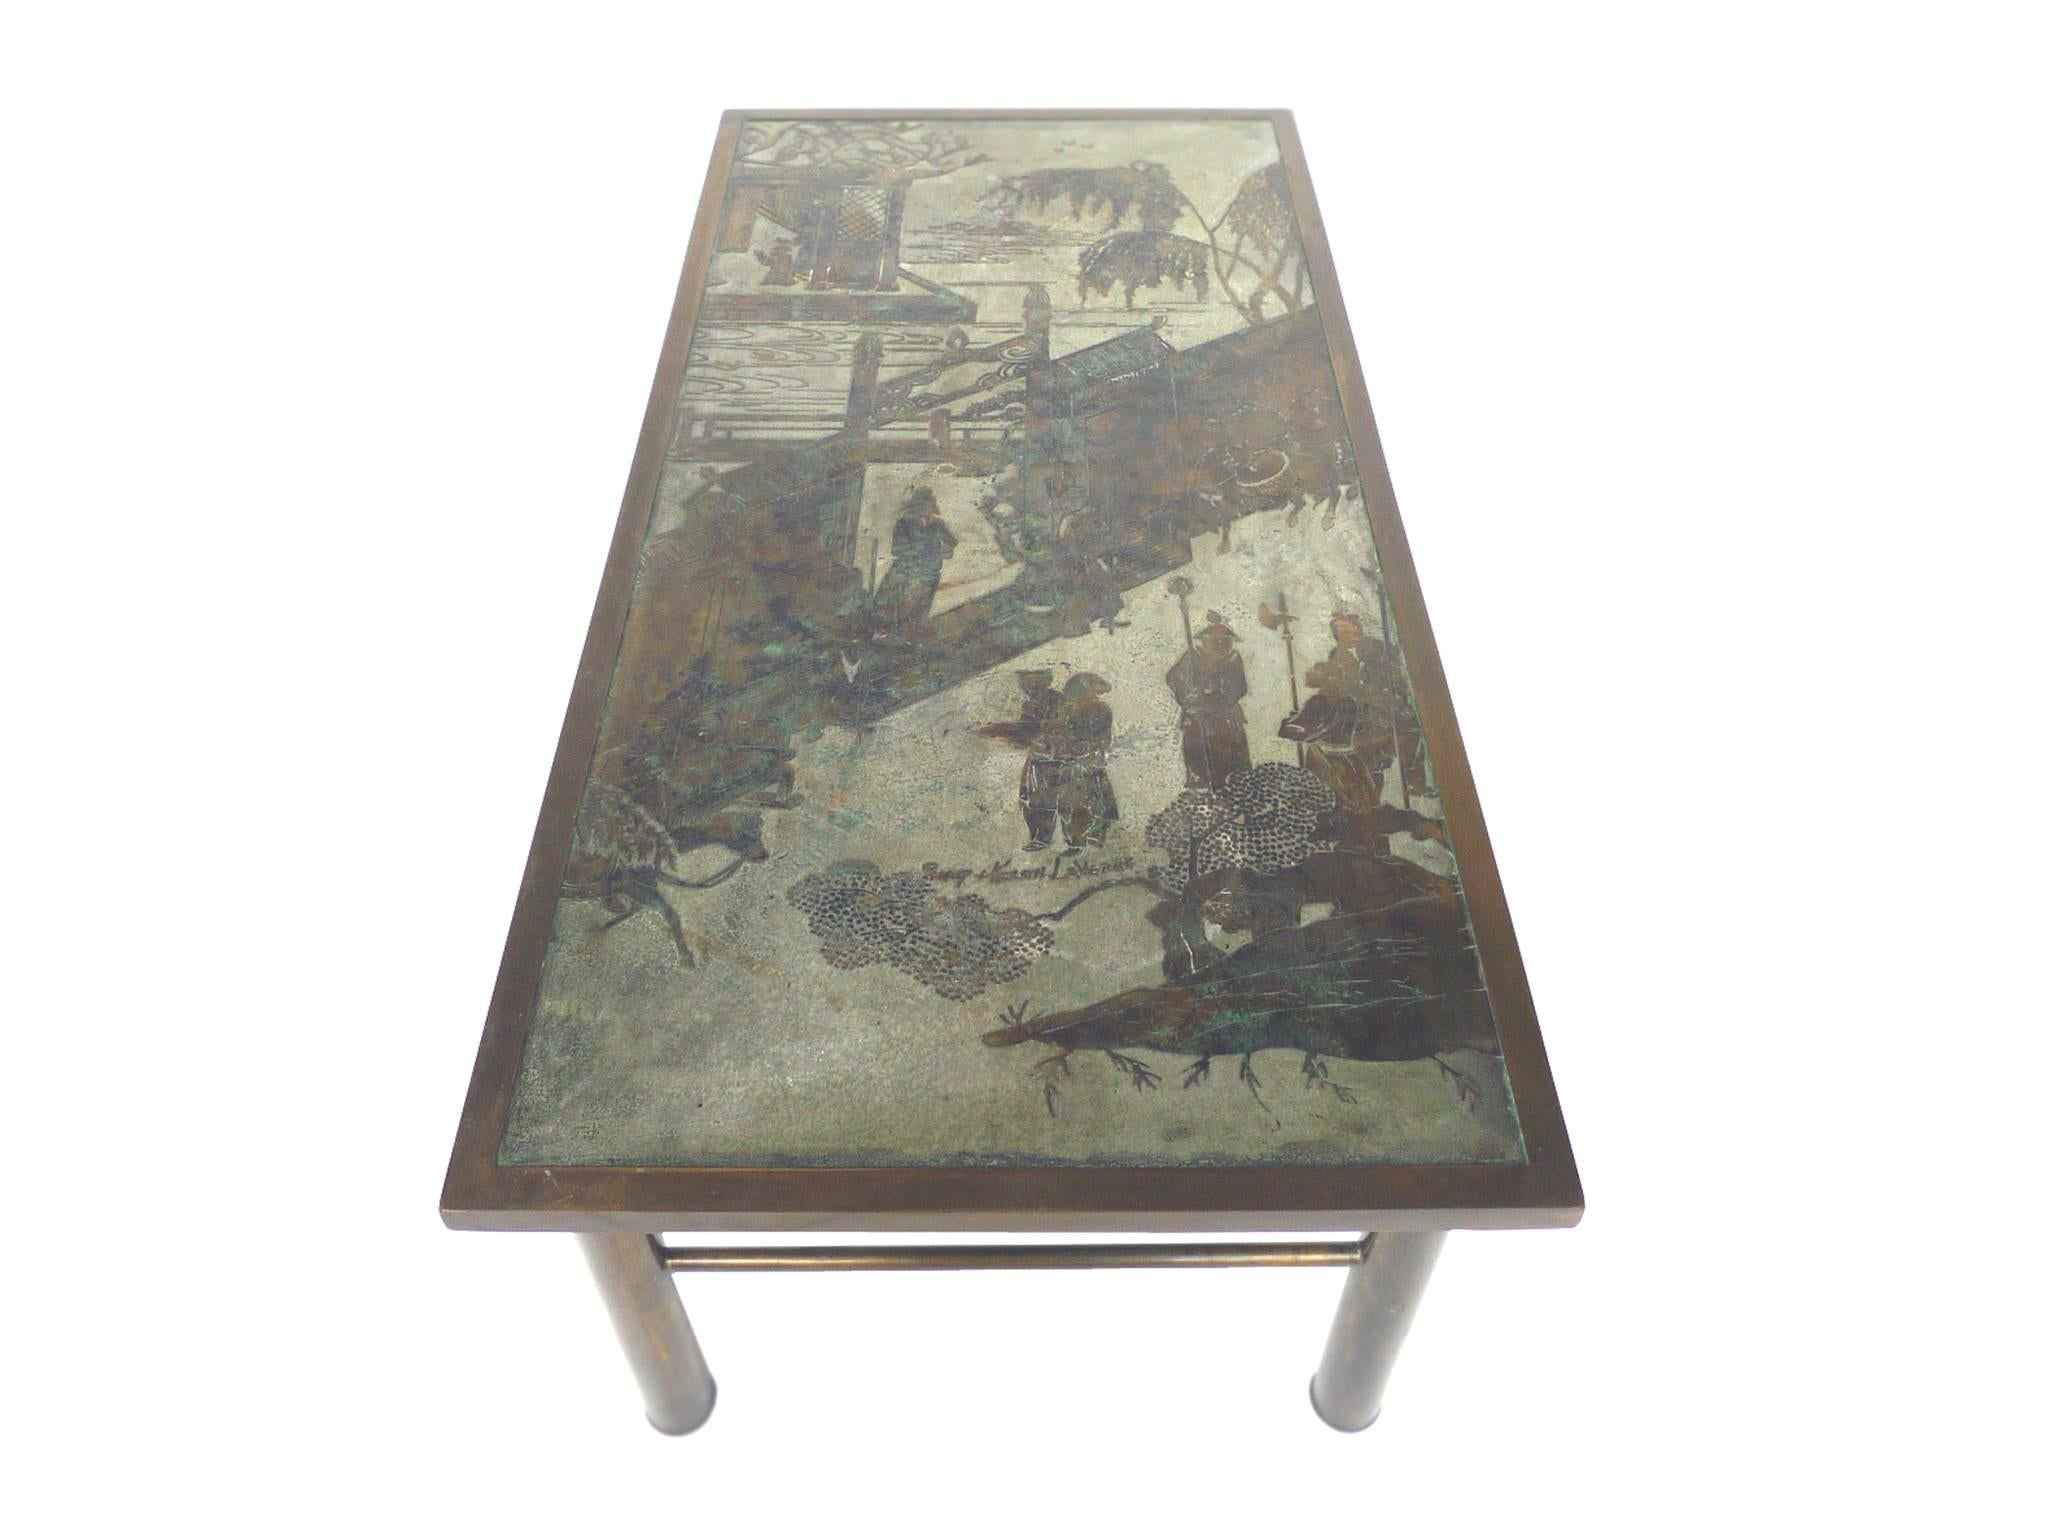 Philip and Kelvin LaVerne, a father-and-son team, created limited-edition furniture with their signature painterly touch, often rendering elaborate pastoral scenes through metalwork. This rectangular bronze coffee table was made circa 1960s-1970s.